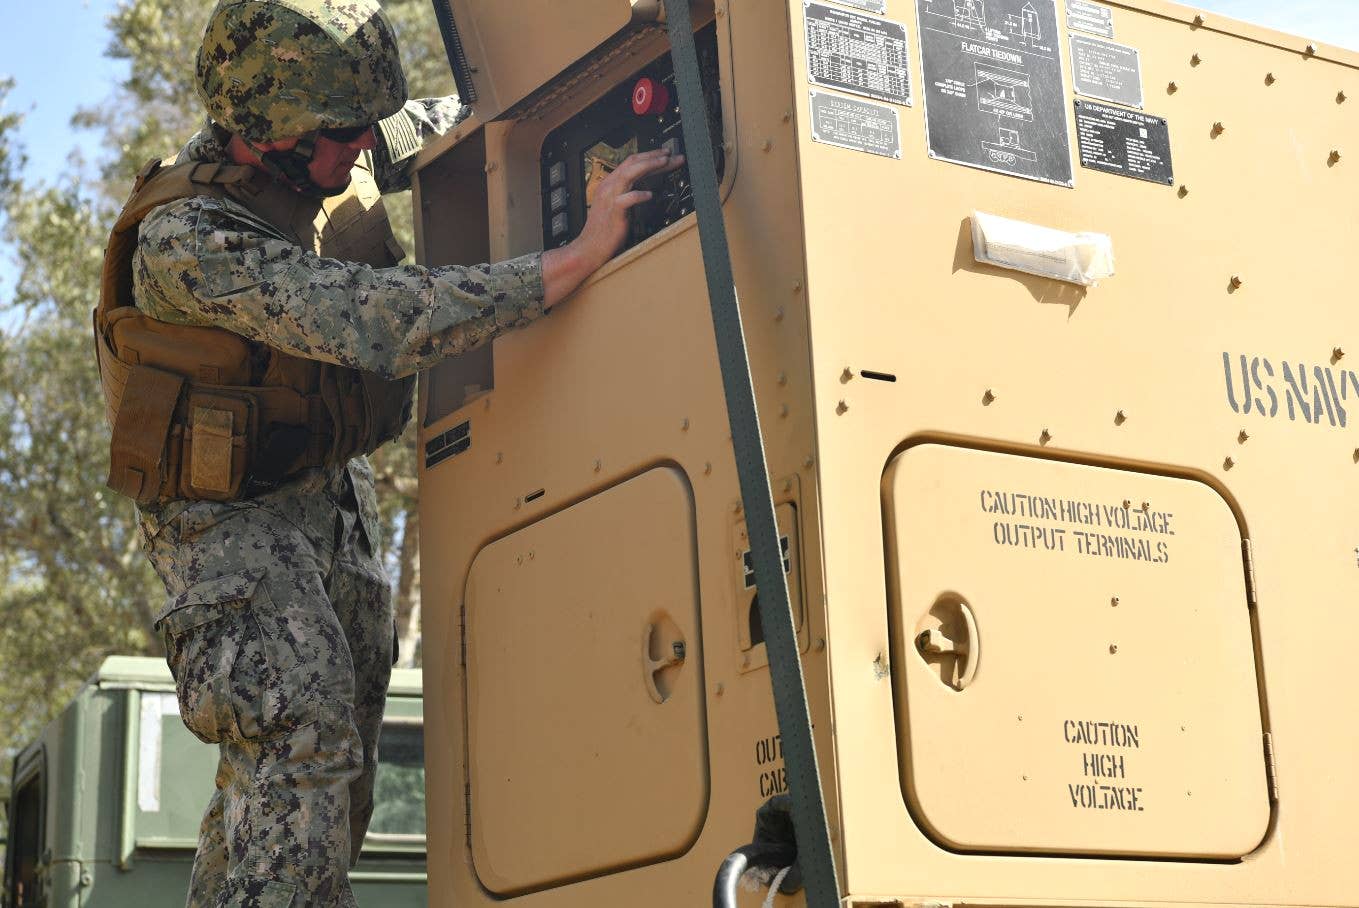 A sailor assigned to NAVFOREUR-AF/Sixth Fleet operators controls on the generator associated with the modular launcher system at the recent demonstration in Europe. <em>USN</em>